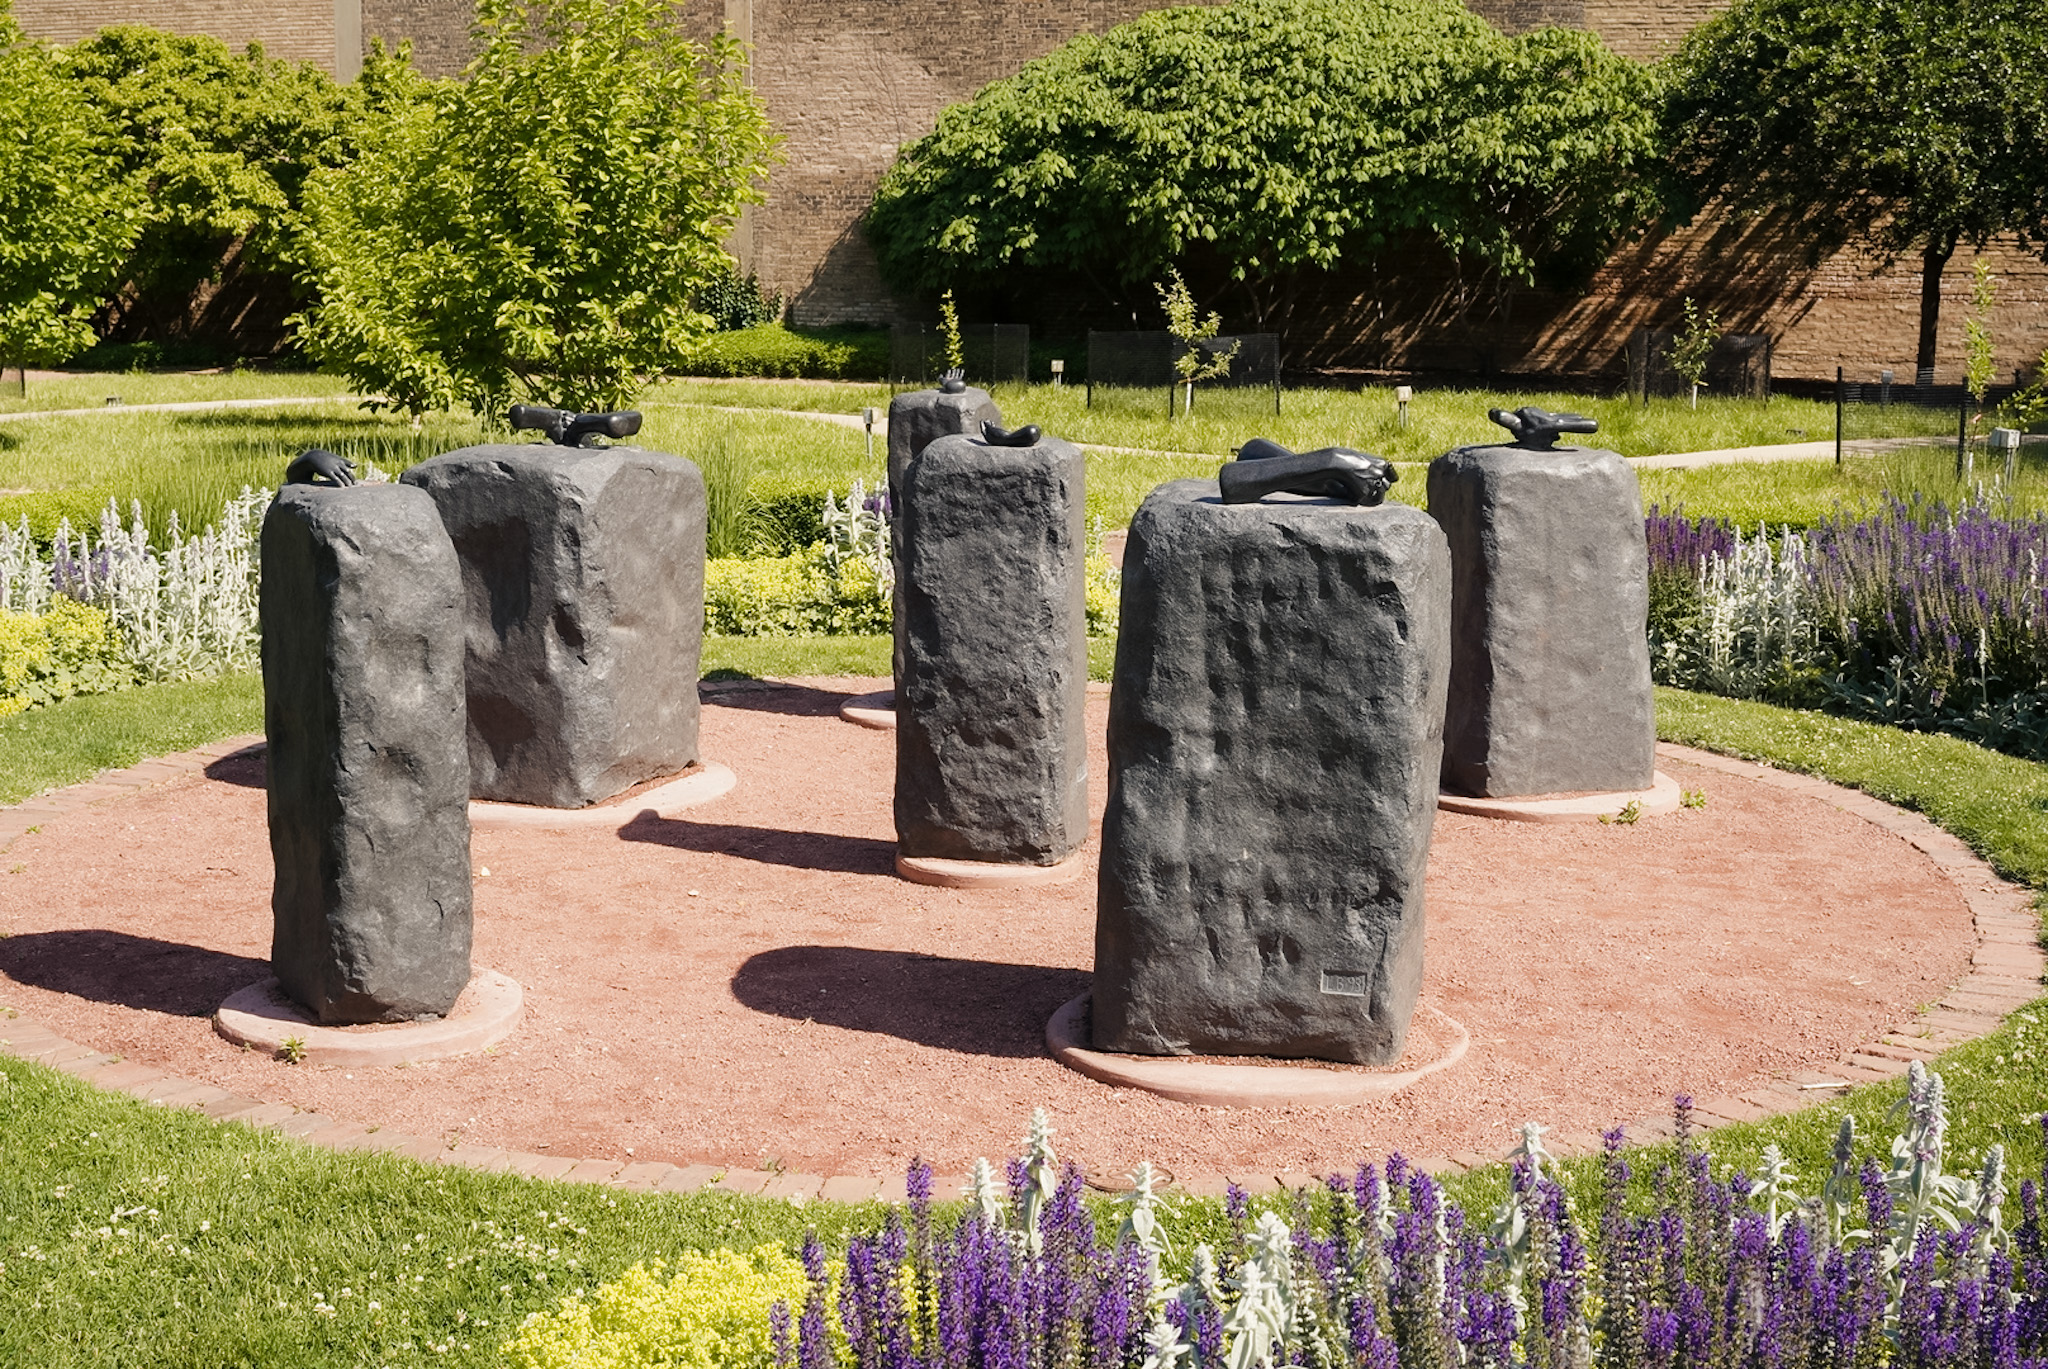 Abstract stone sculptural group in an outdoor setting